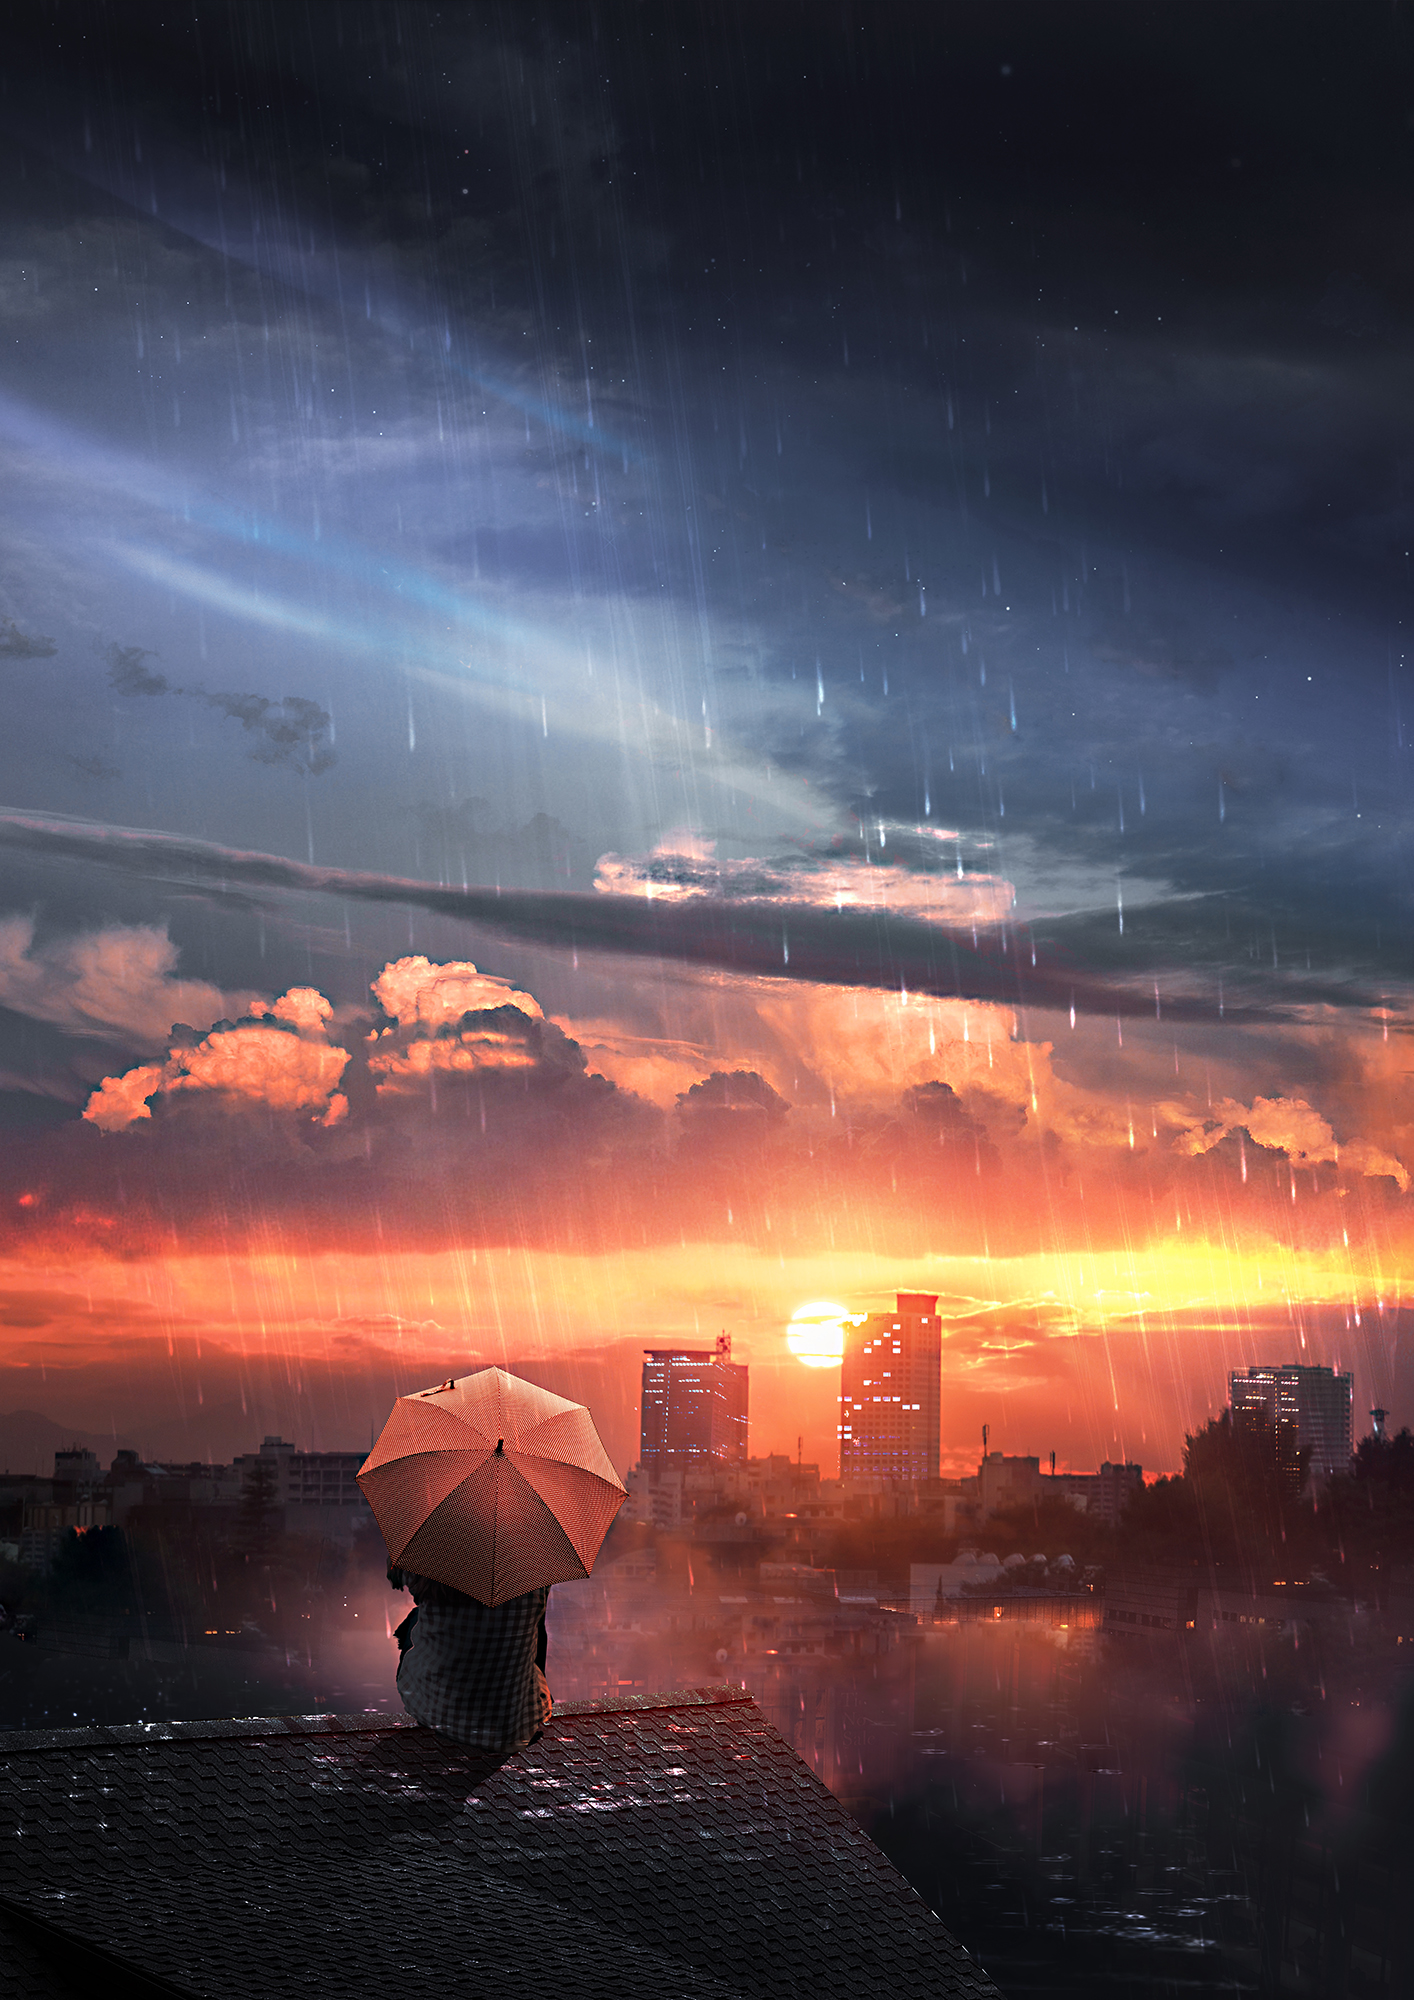 rain, privacy, loneliness, art, night, roof, seclusion, sky, umbrella wallpapers for tablet